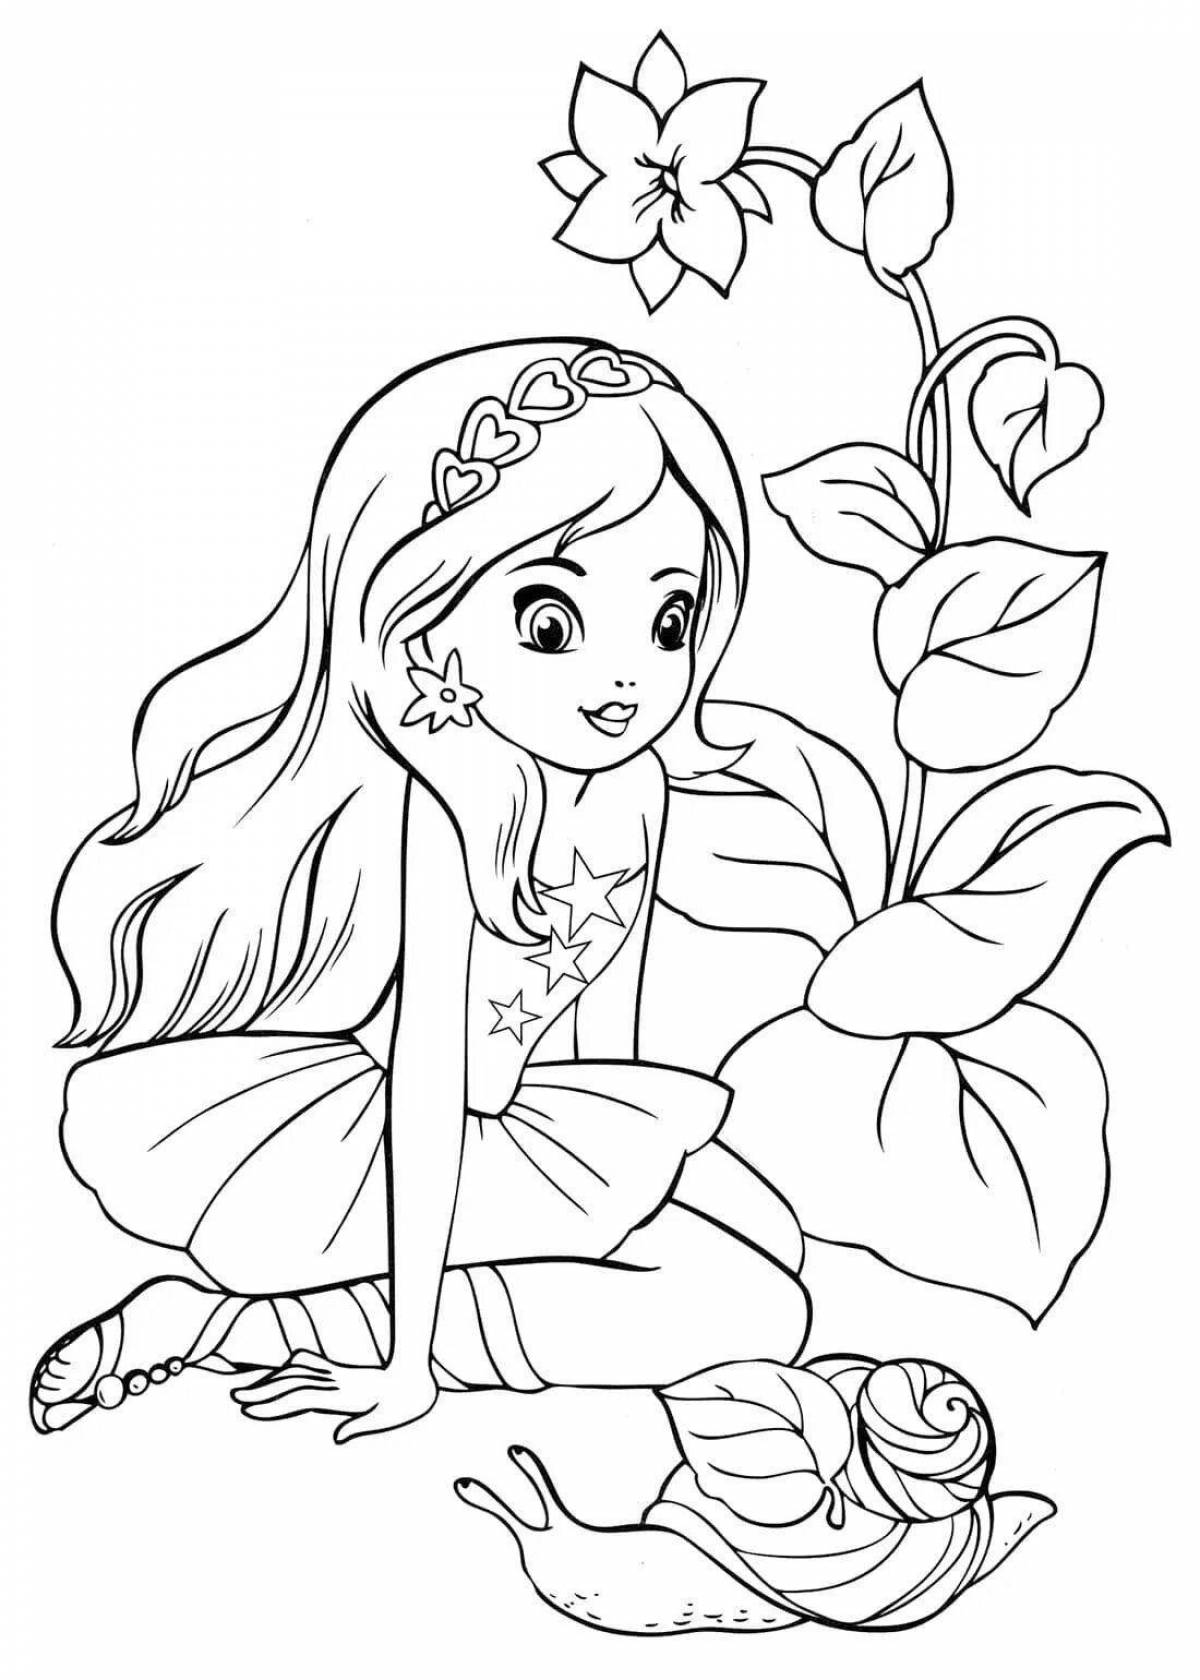 Creative coloring draw coloring pages